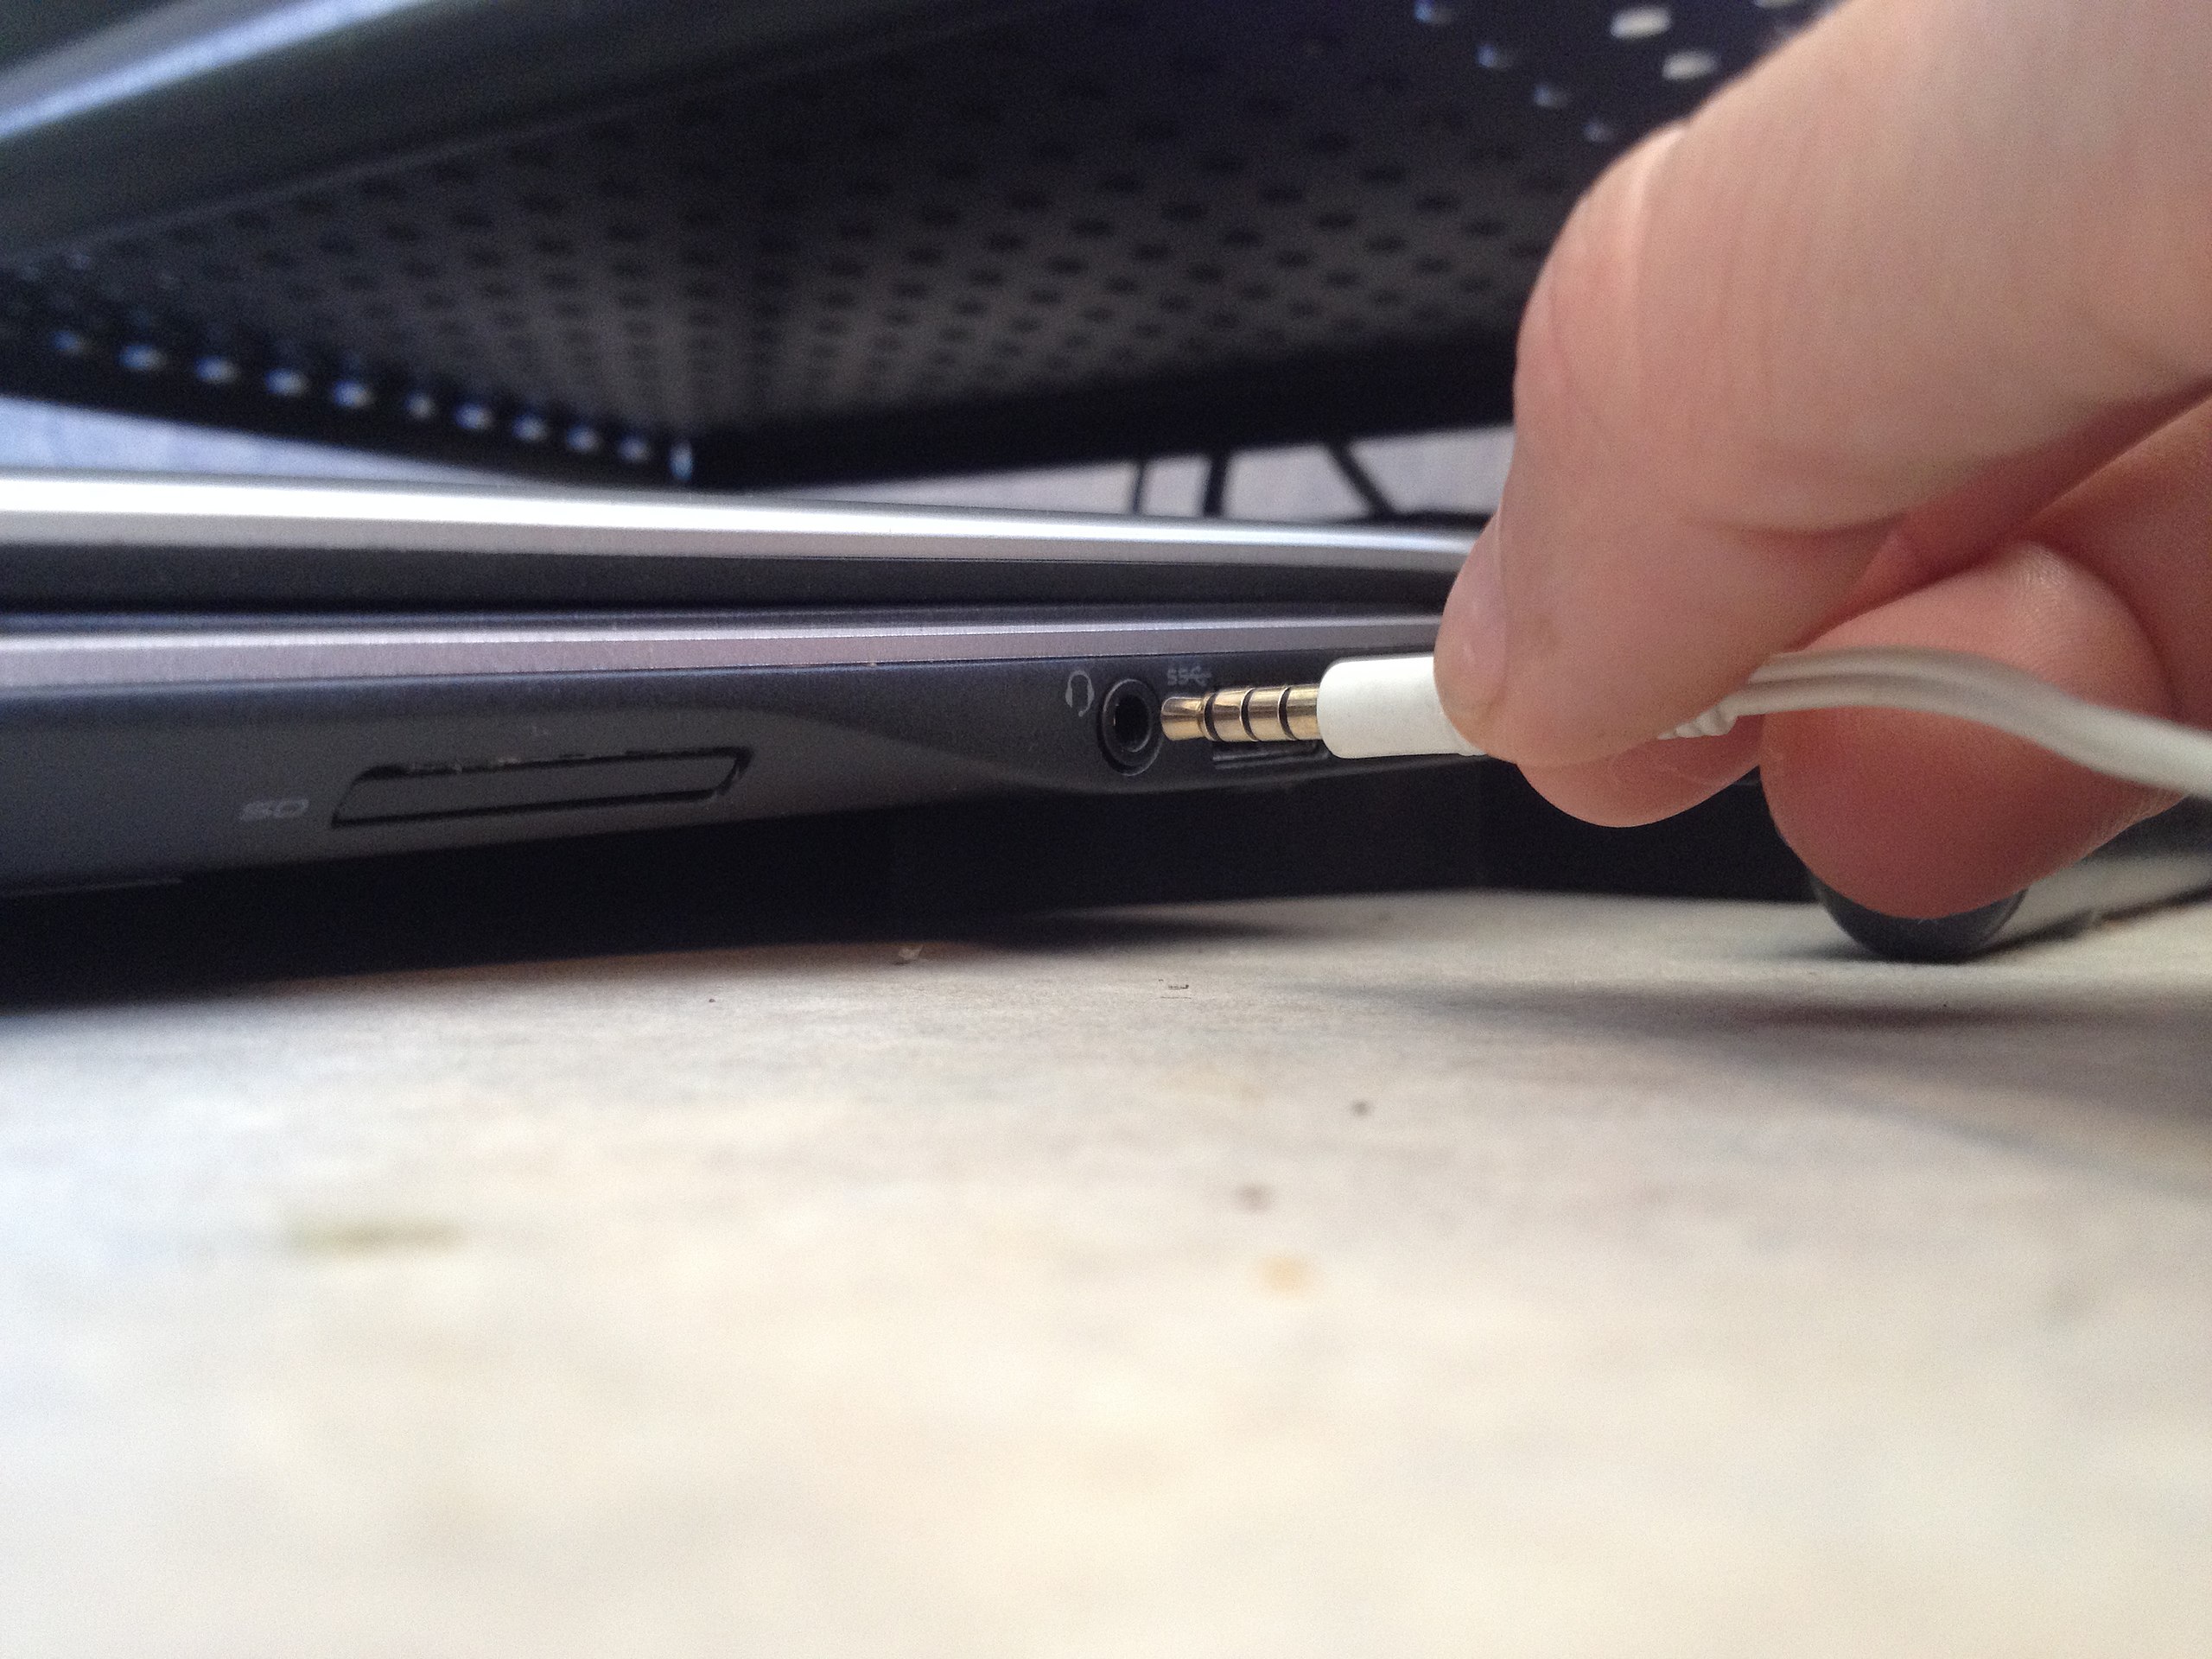 Person plugging in headphone jack into laptop audio port